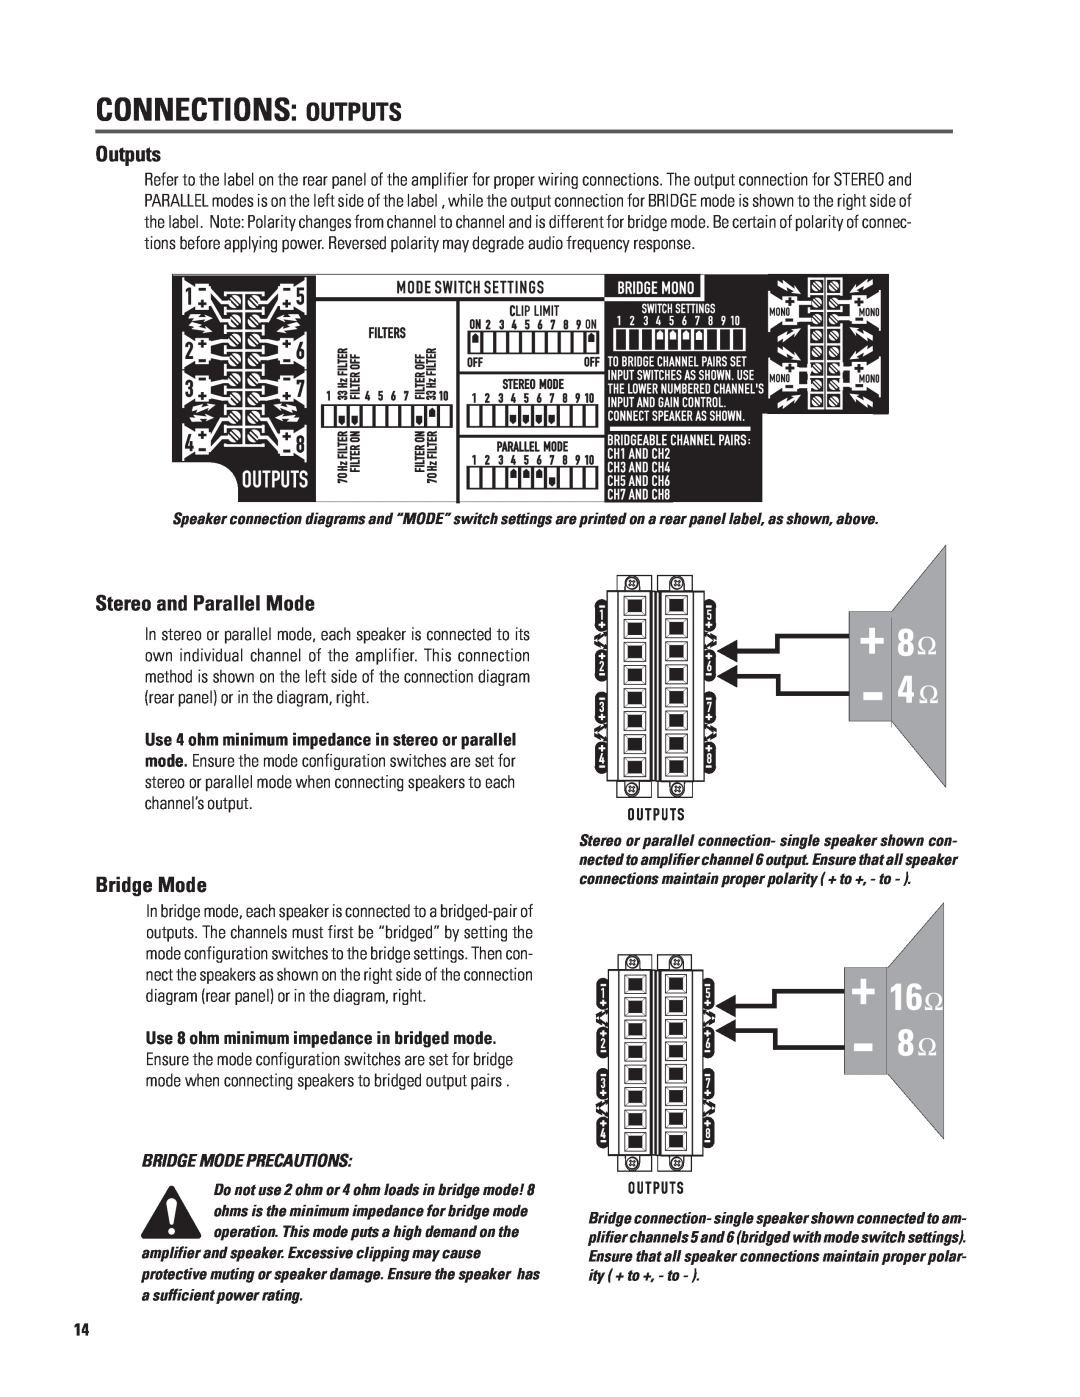 QSC Audio CX168 user manual Connections Outputs, Stereo and Parallel Mode, Bridge Mode Precautions 